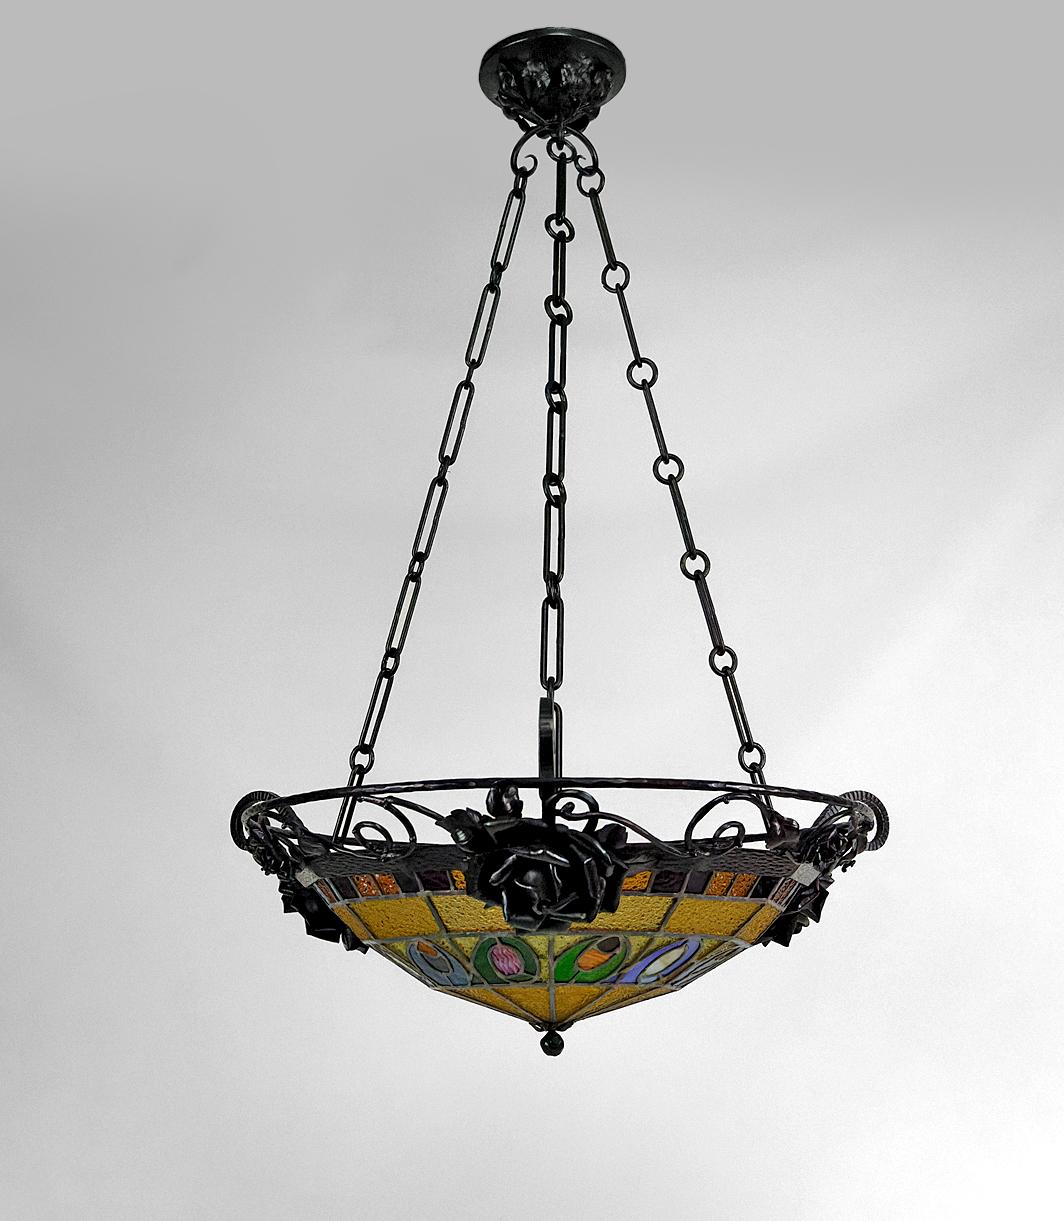 Art Deco wrought iron chandelier by Augustin Louis Calmels

Augustin Louis CALMELS (1880-1971) was a painter and creator of stained glass windows, active in the southwest of France during the Art Nouveau and Art Deco periods.

France, Circa 1920

In